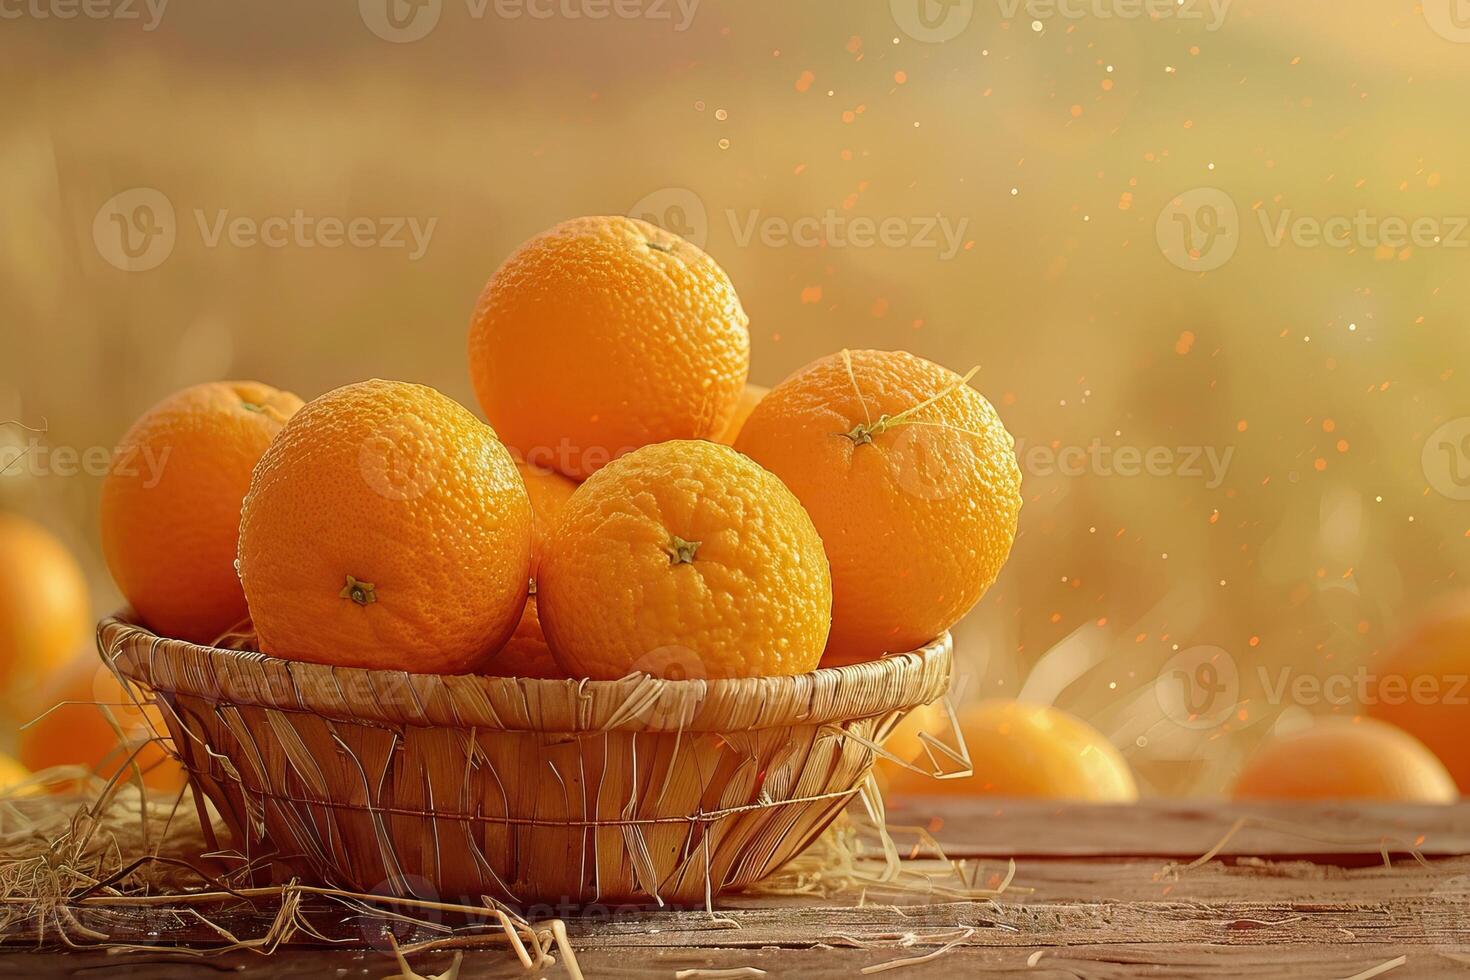 Some oranges in a basket over a wooden surface on a orange field background photo